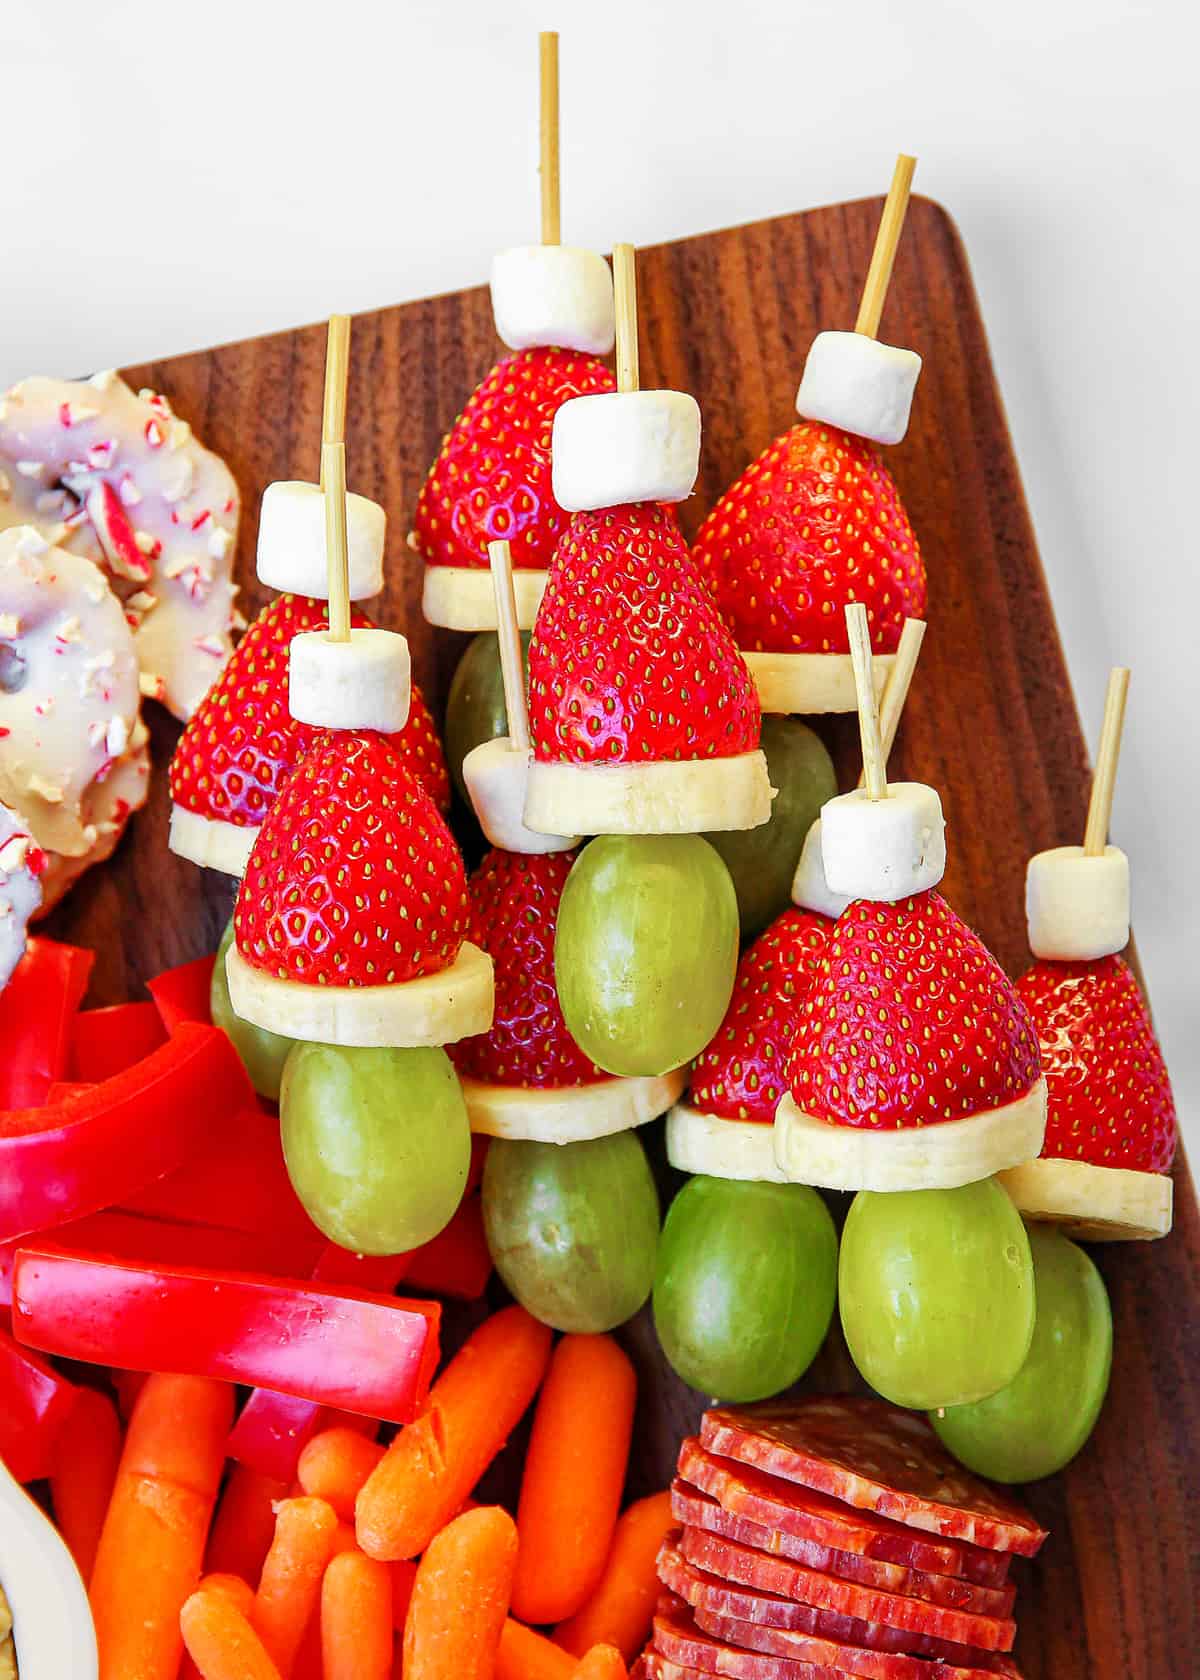 Holly Jolly Kid's Snack Board by The BakerMama